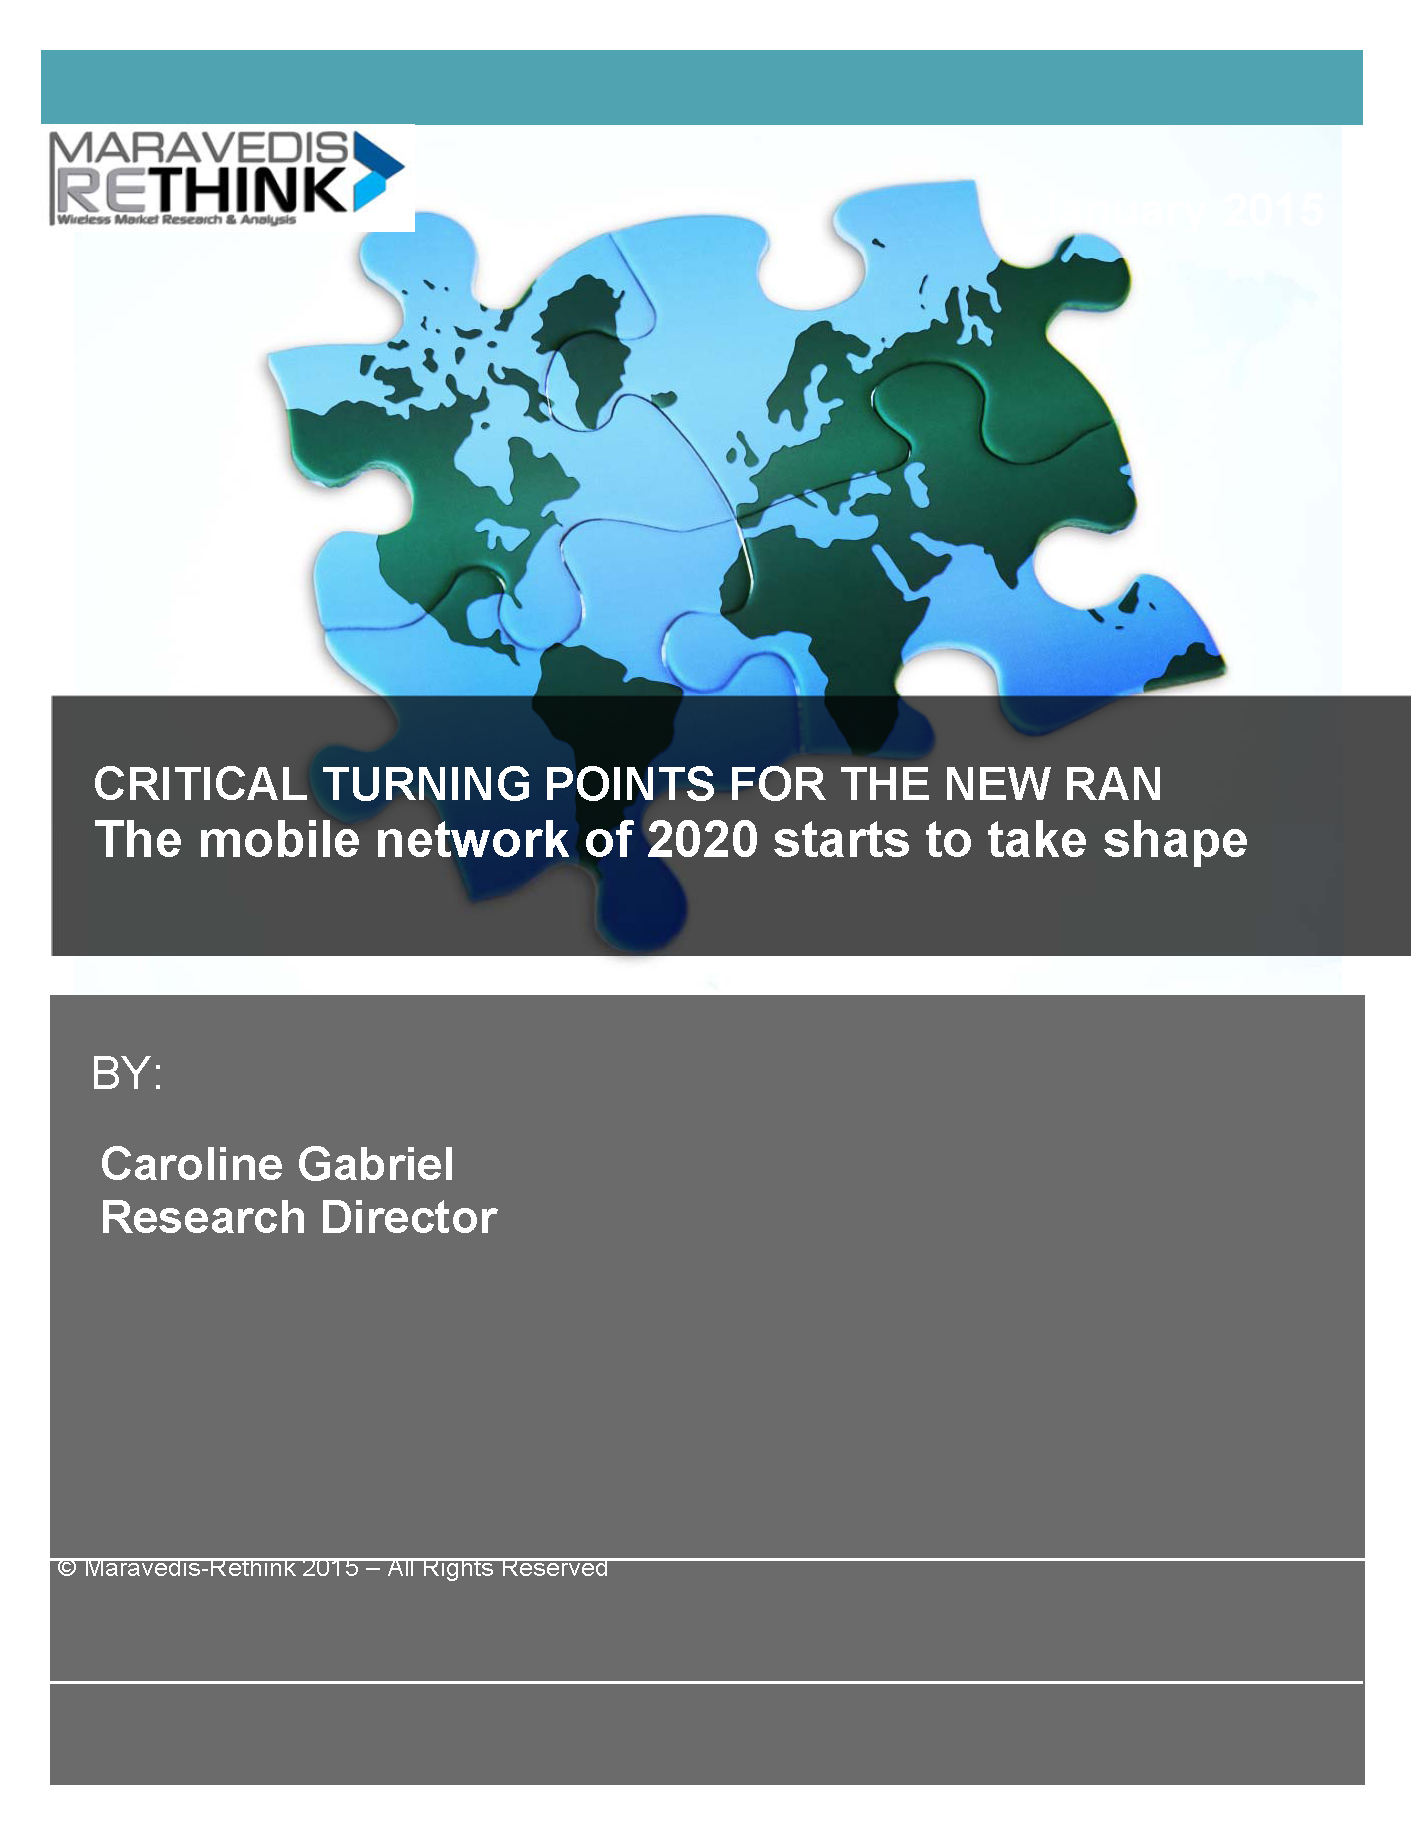 The mobile network of 2020 starts to take shape